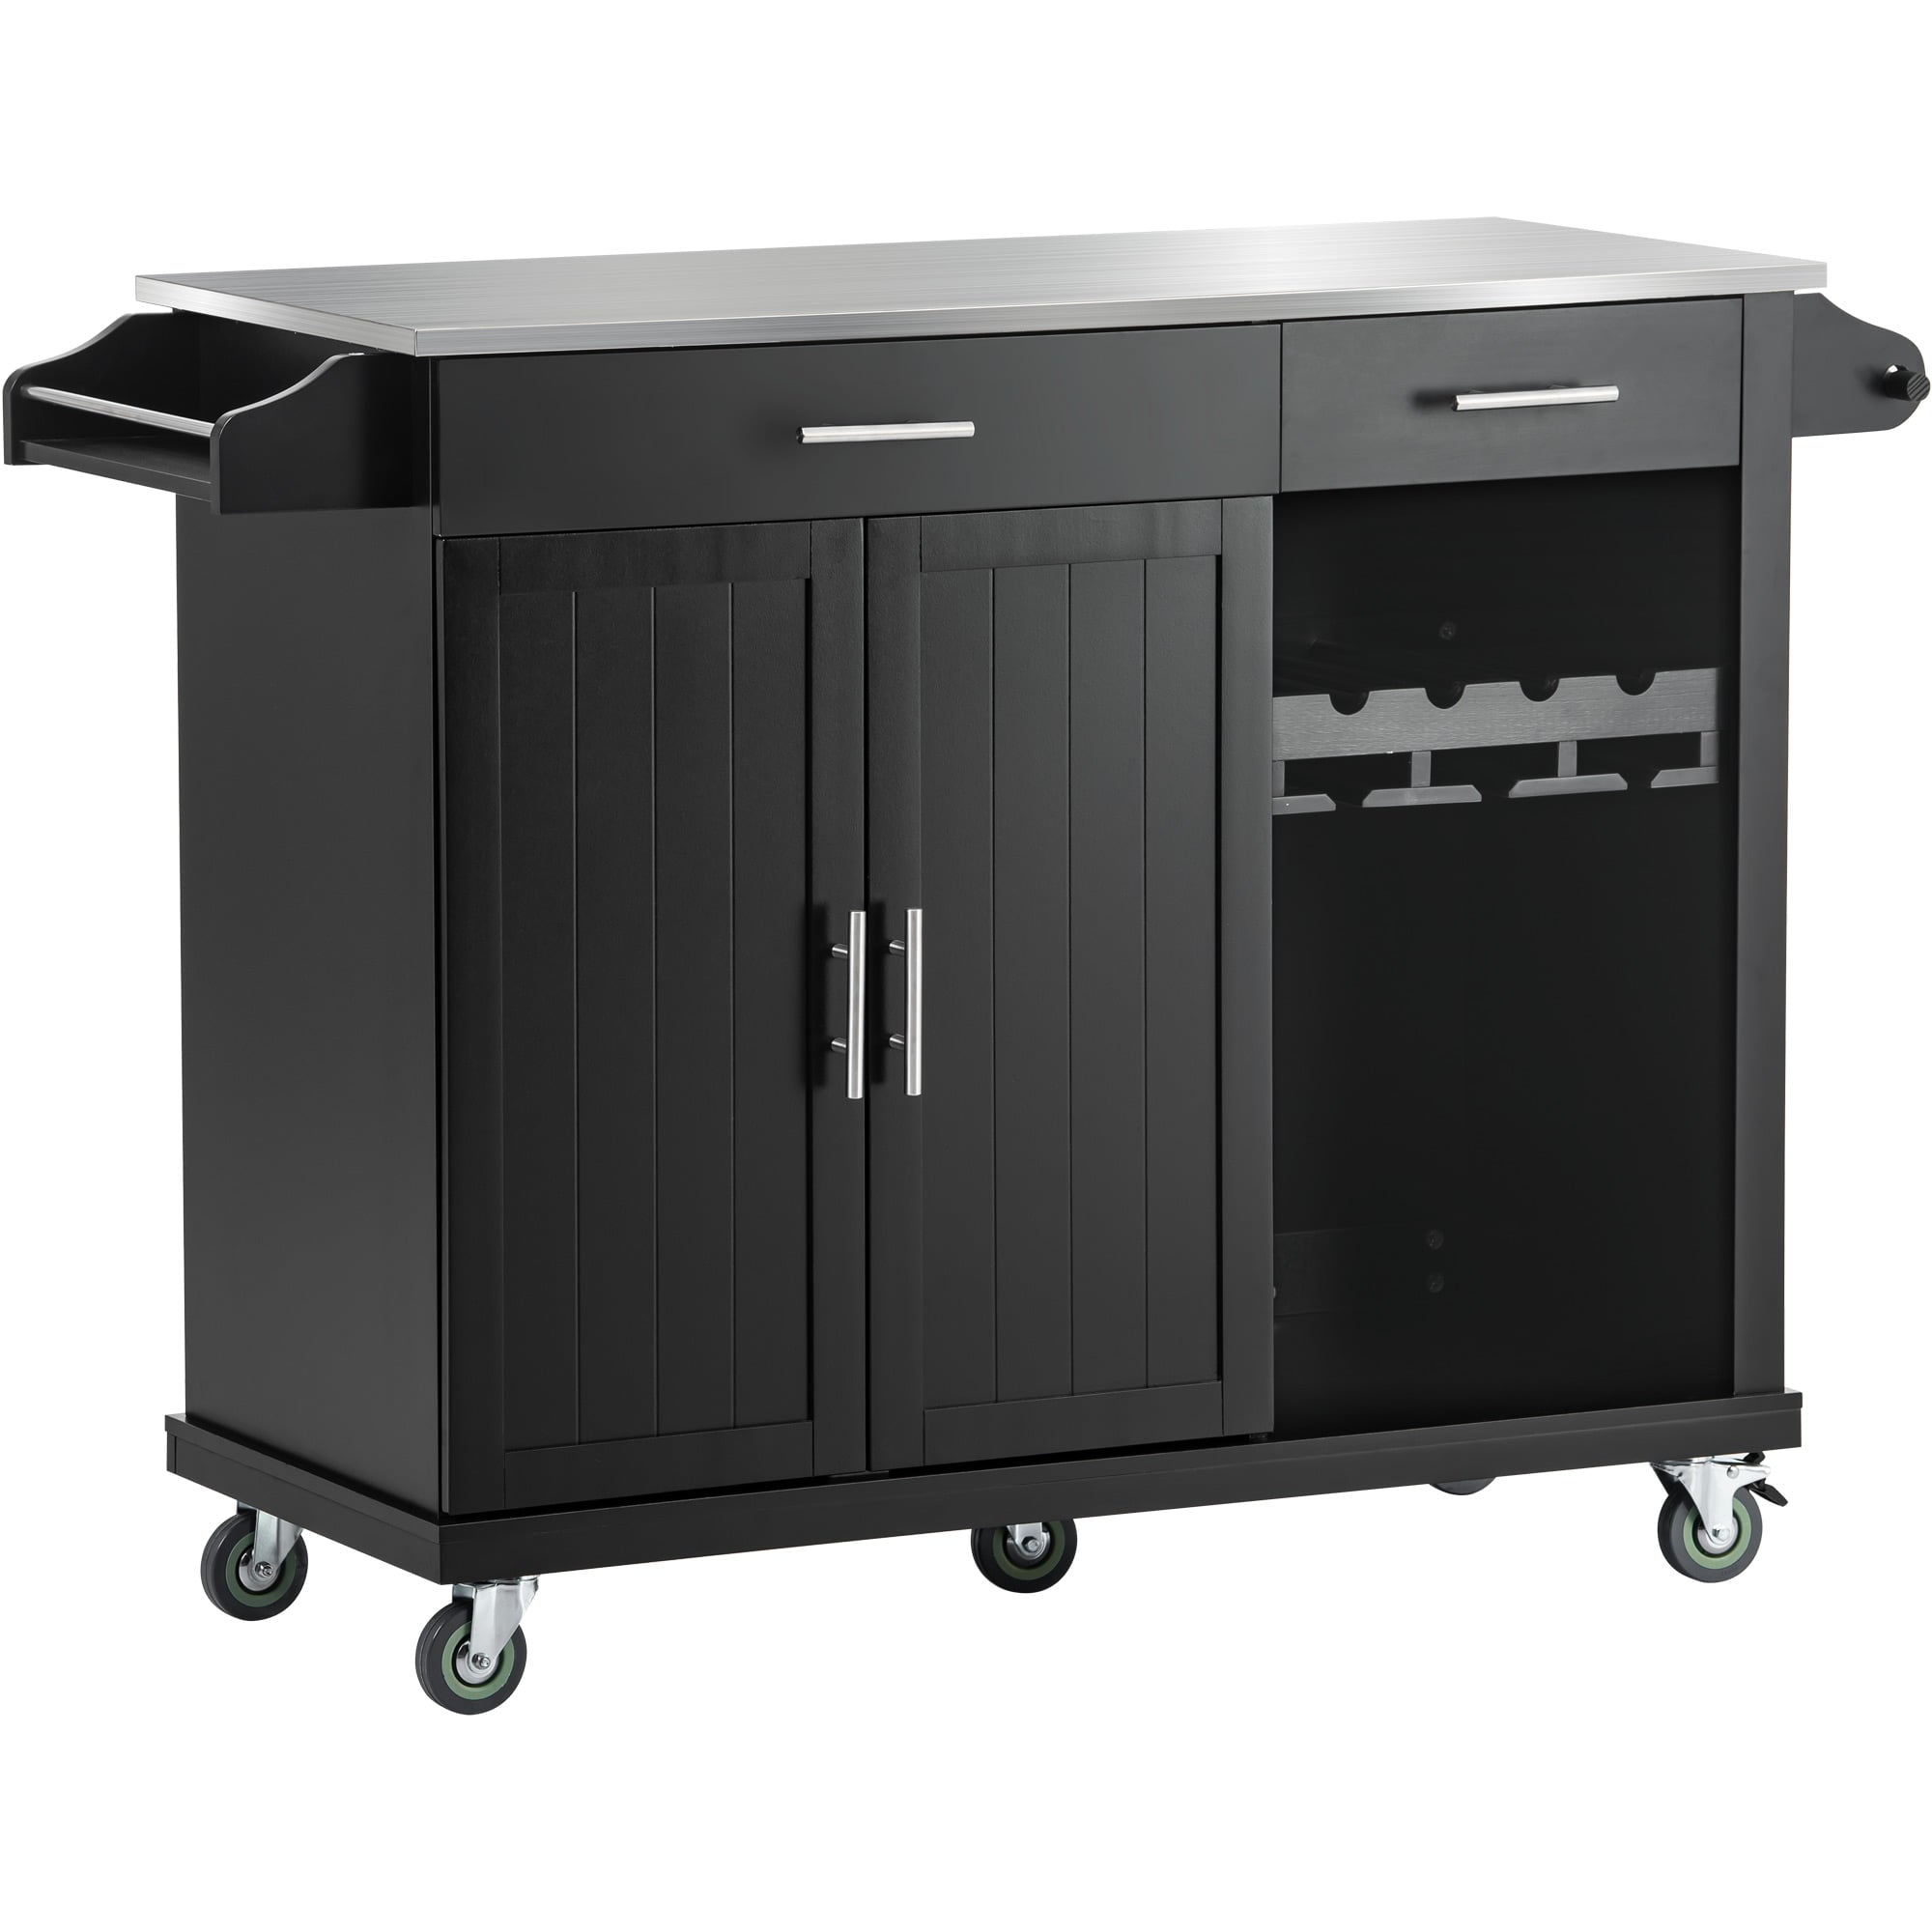 Kitchen Cart with Stainless Steel Top， Mobile Kitchen Island Cart with Spice Rack and Towel Rack， Kitchen Sideboard Buffet Cabinet with 2 Drawers and Wine Rack， Black